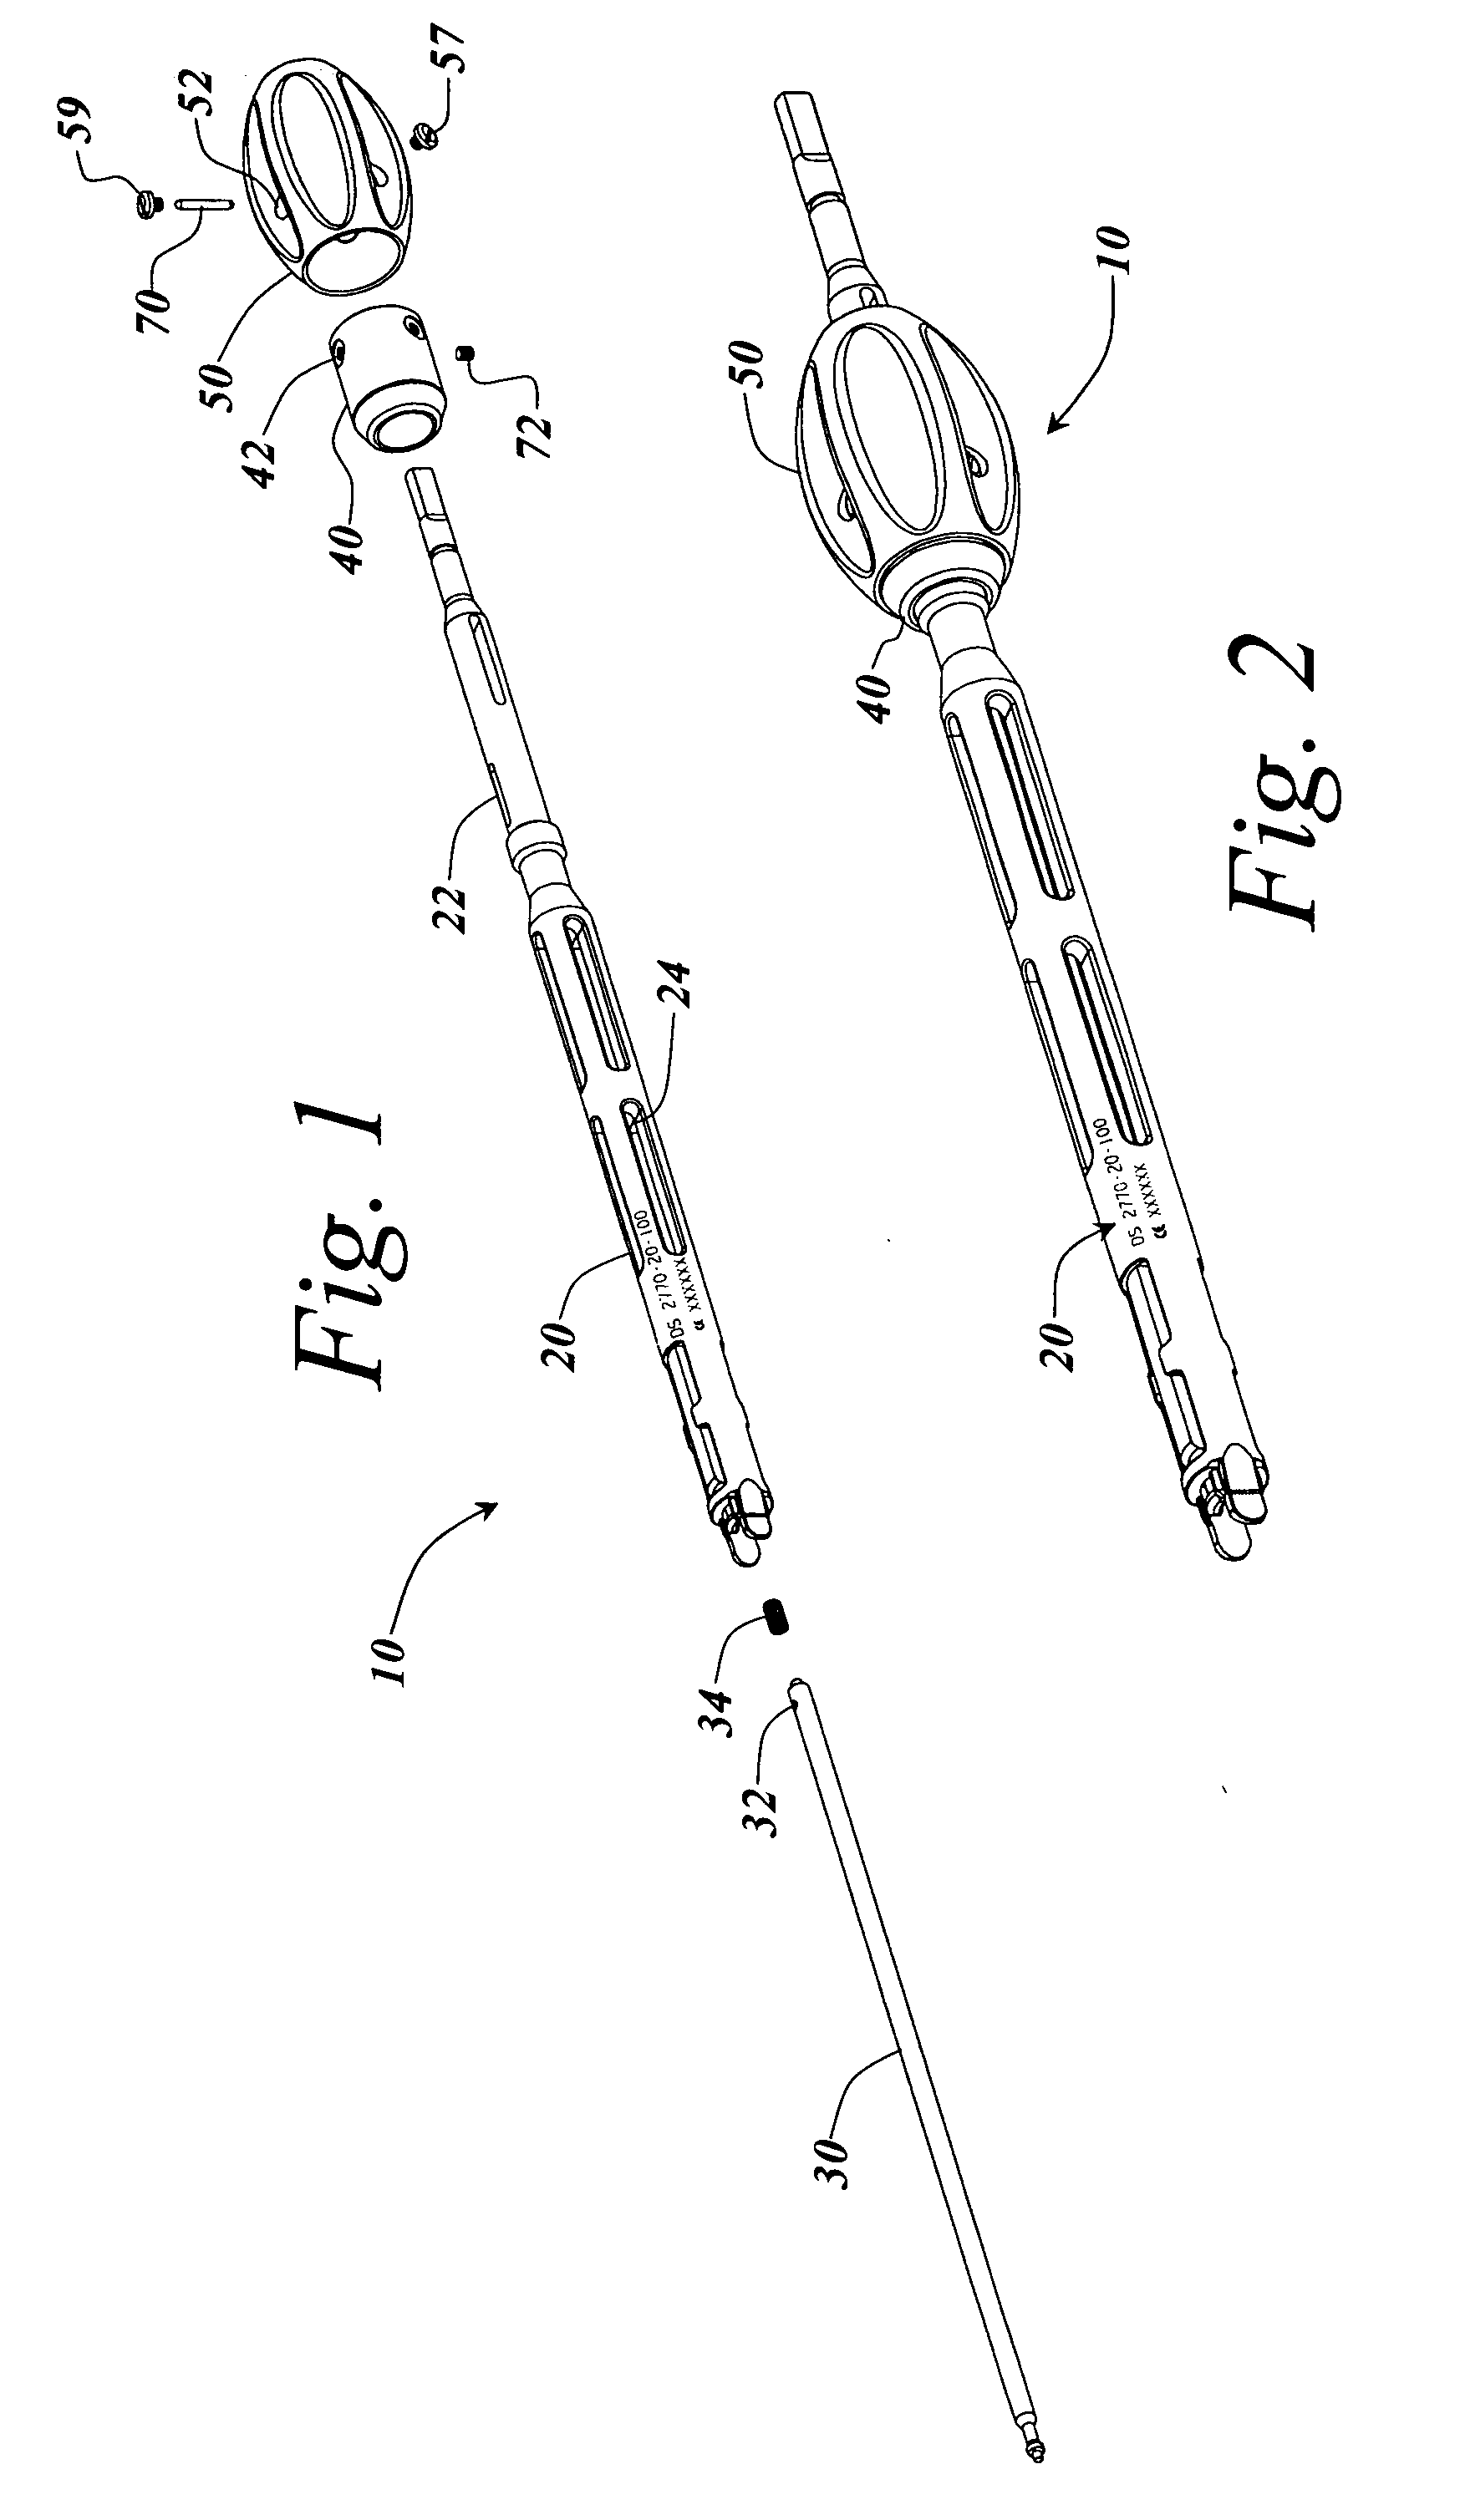 Instrument for inserting, adjusting and removing pedicle screws and other orthopedic implants